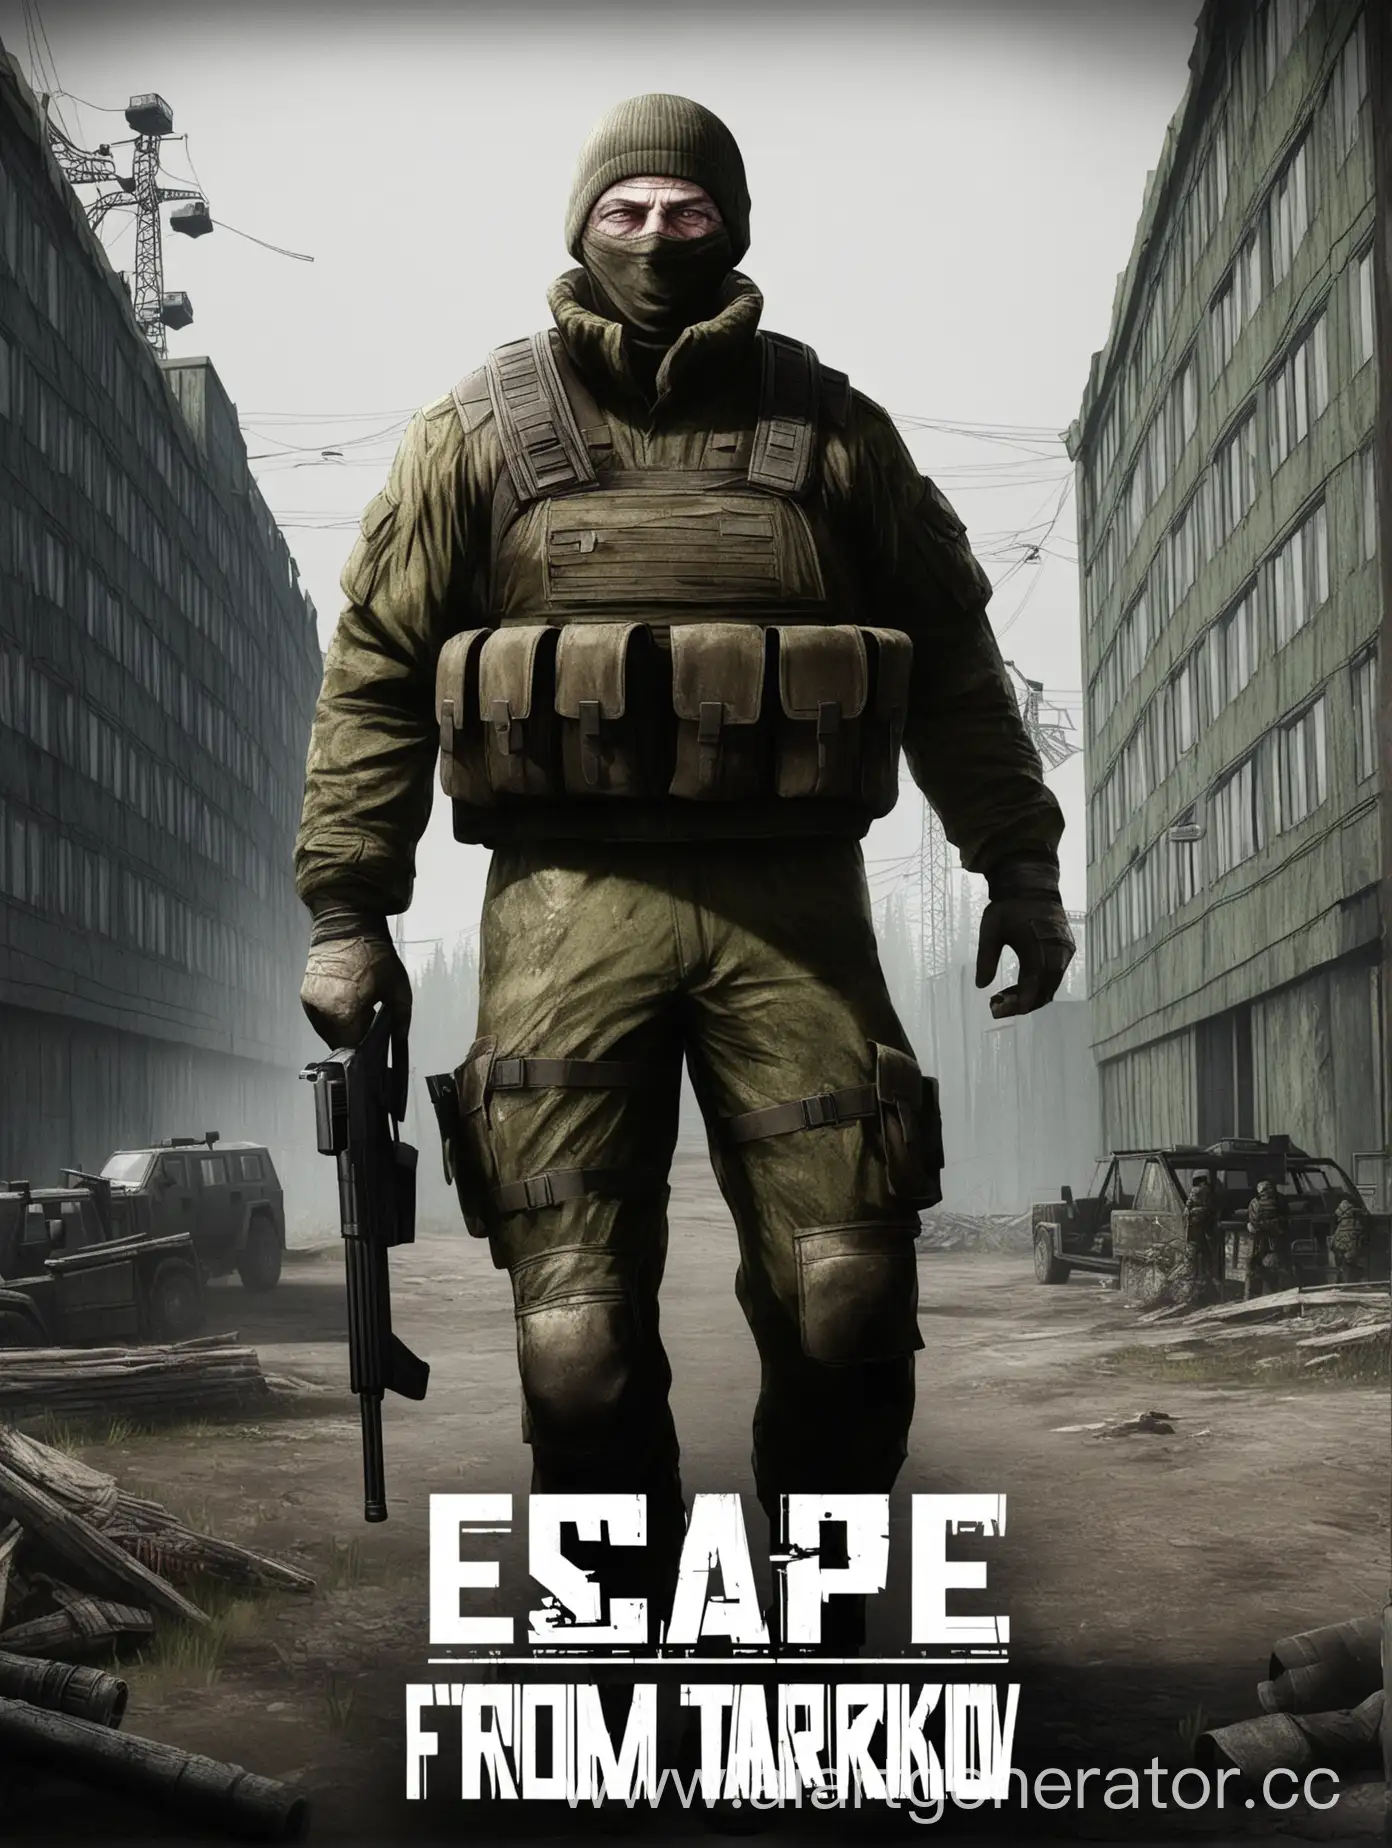 Intense-Battle-Scene-in-PostApocalyptic-Wasteland-Escape-from-Tarkov-Poster